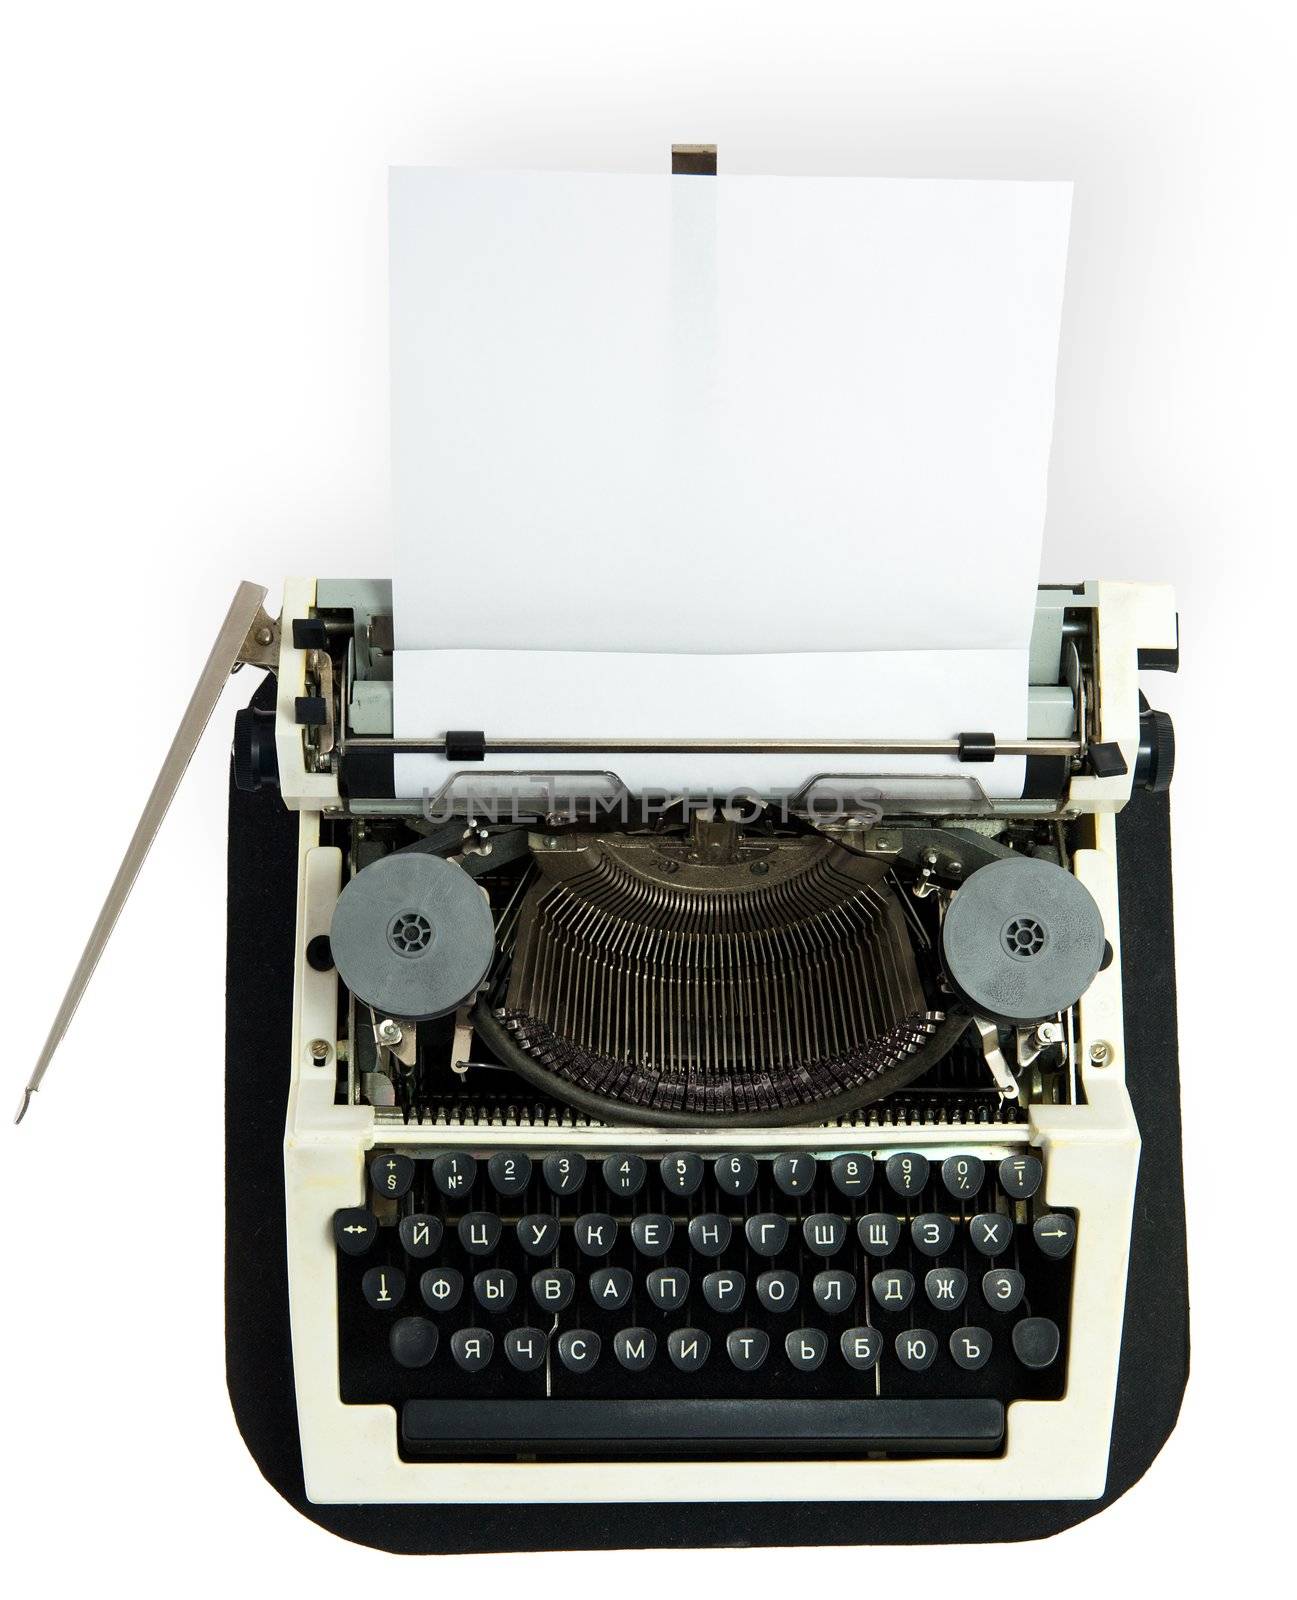 Typewriter with the inserted leaf of a paper in the carriage